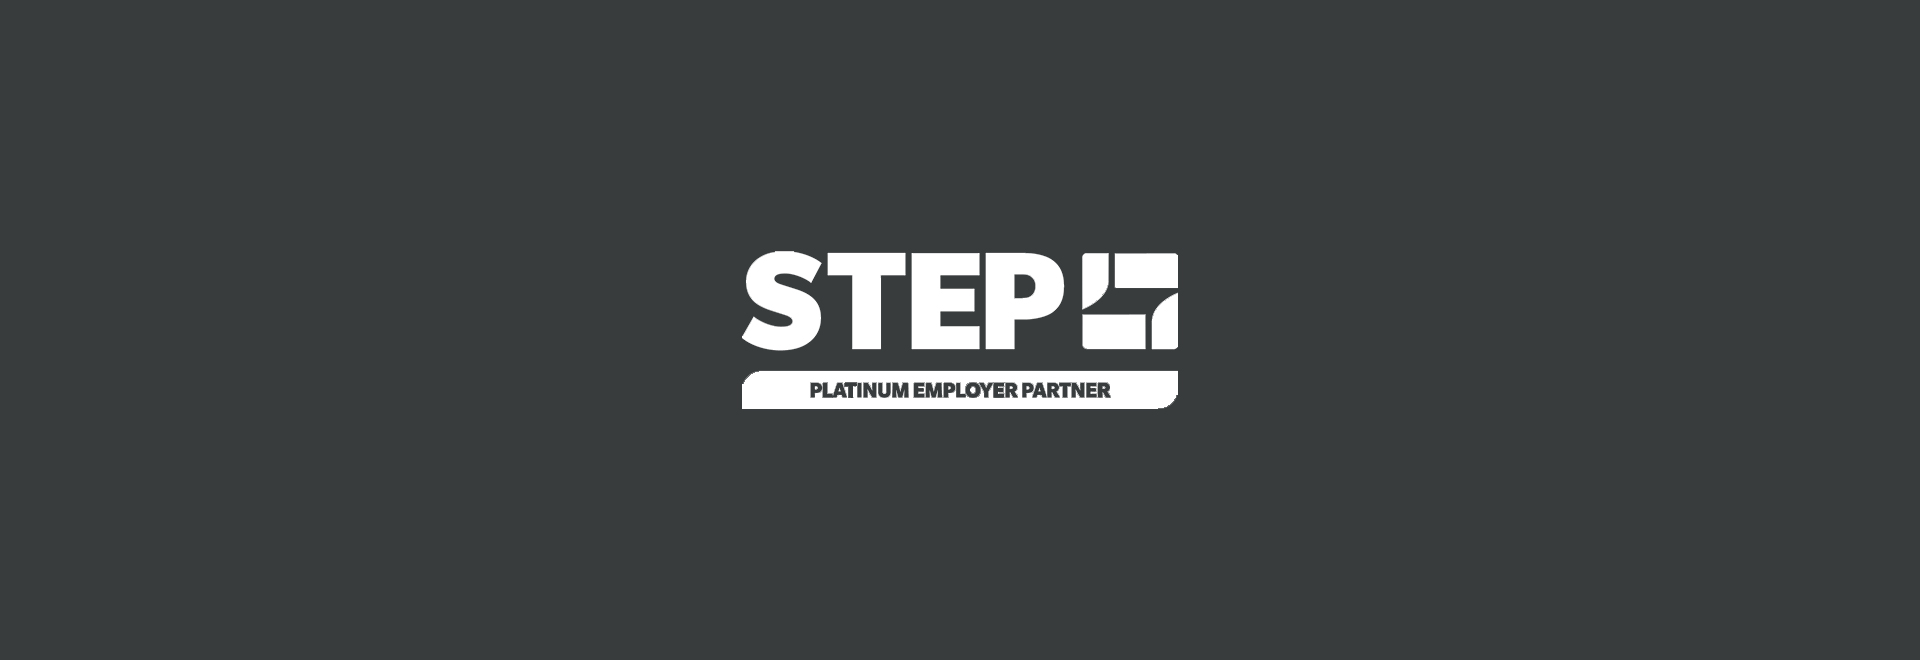 Accuro accredited as a STEP Platinum Employer Partner